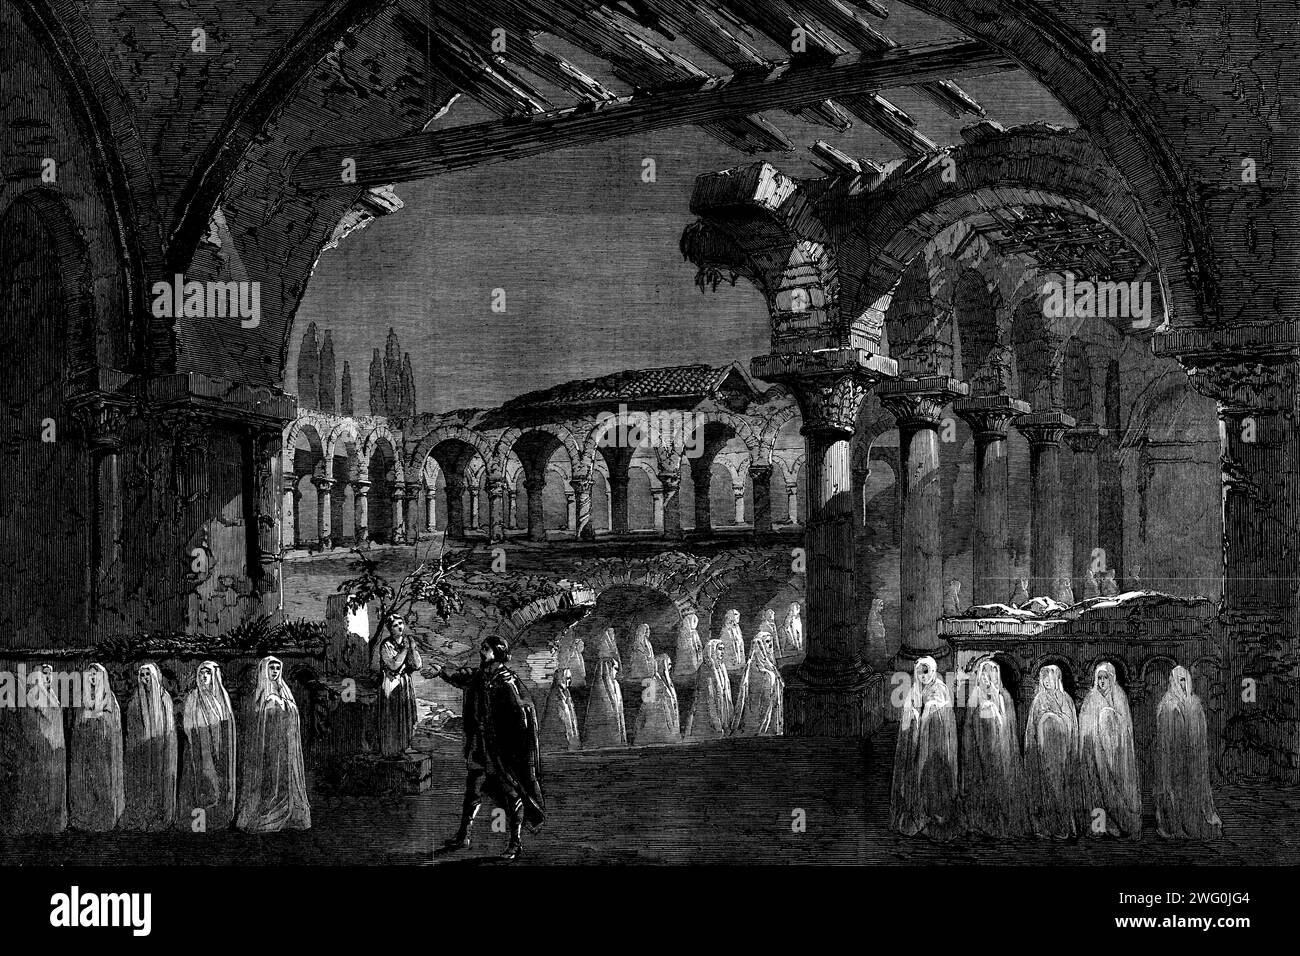 The Nun Scene in Act III. of &quot;Robert le Diable&quot; at Her Majesty's Theatre, 1862. London stage production. '...the scene in the third act of this celebrated opera...in which the nuns buried in the ruined cloisters of the old abbey, under the spell of the fiend Bertram, &quot;revisit the glimpses of the moon&quot;, and come gliding in from every side, a ghastly band clad in the habiliments of the grave. This scene is represented by the painter, Mr. William Callcott, with great pictorial power, and its effect is in the highest degree unearthly and appalling'. From &quot;Illustrated Londo Stock Photo